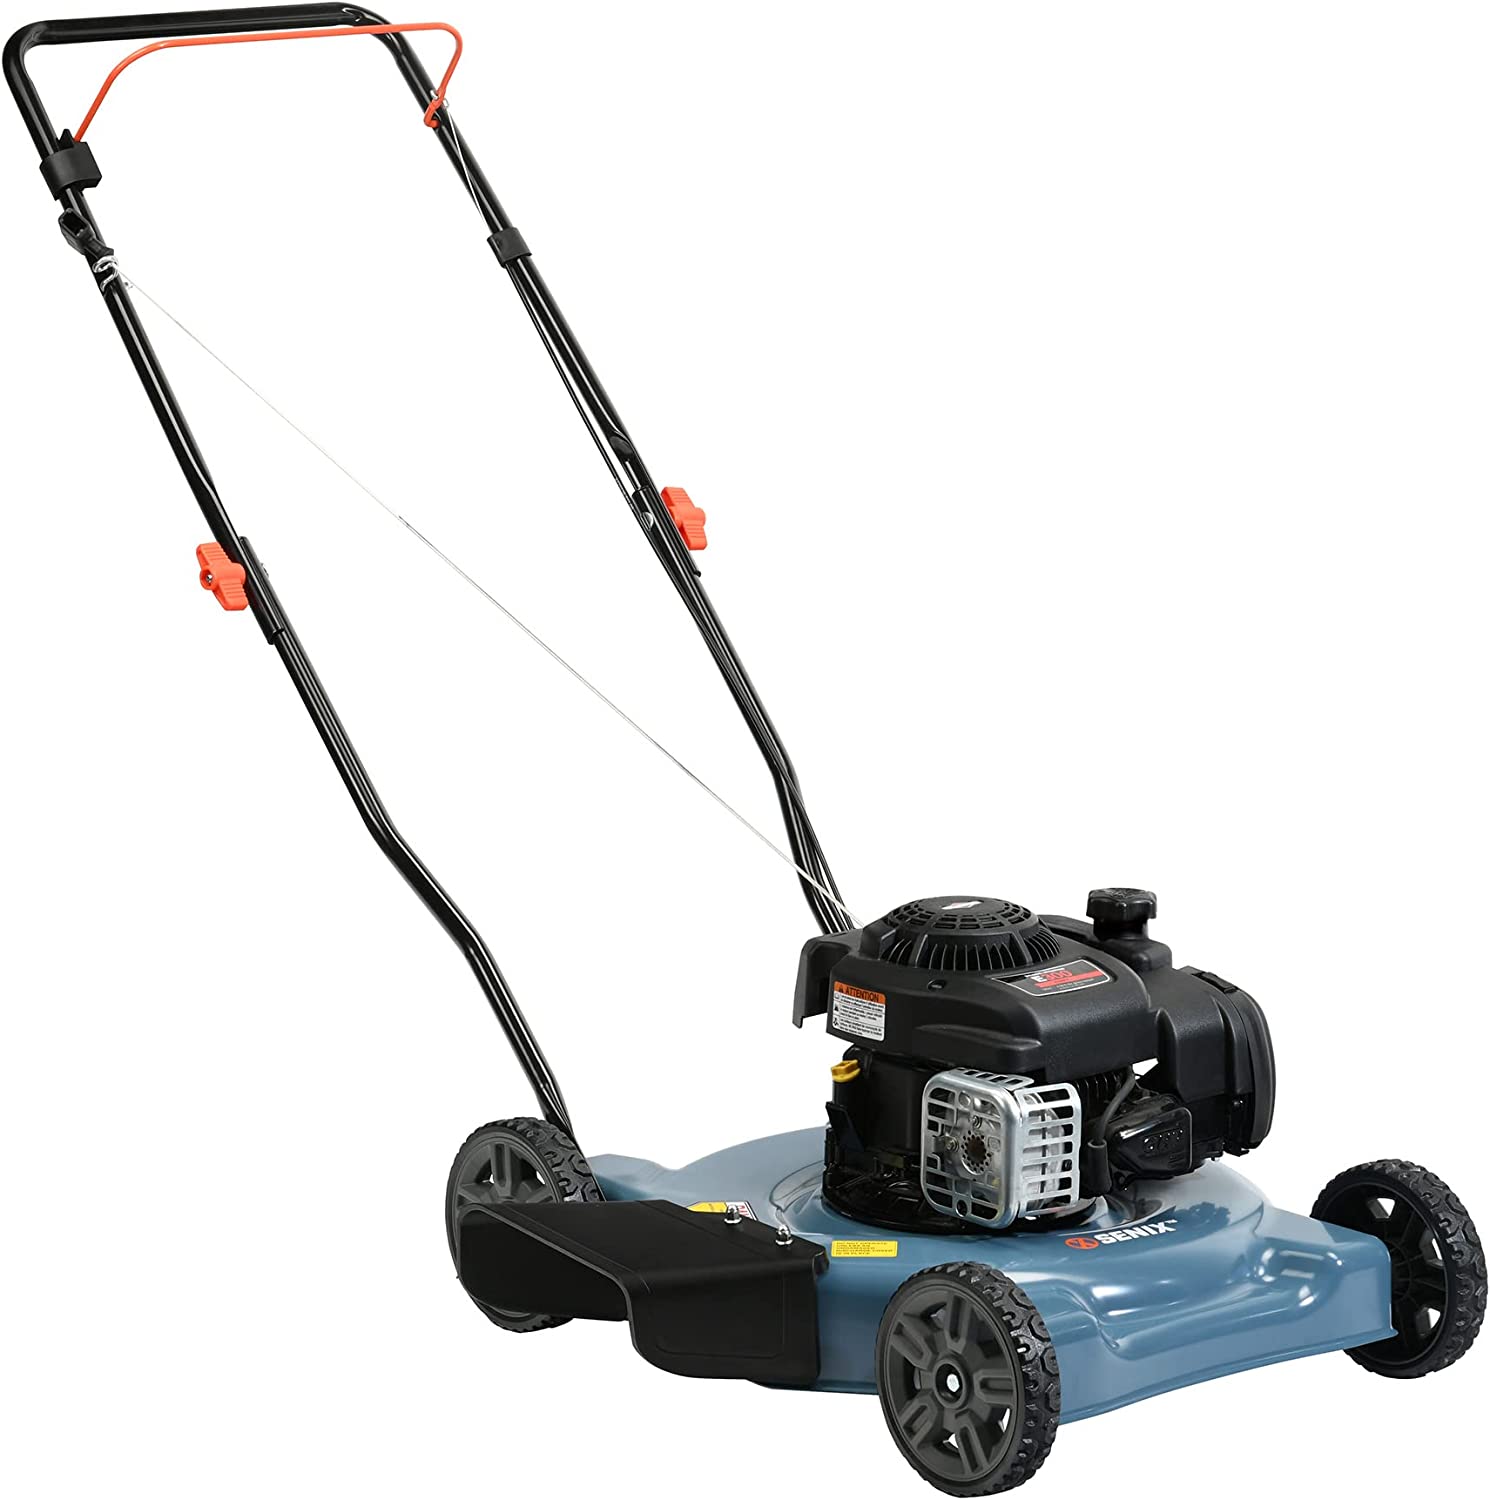 SENIX Gas Lawn Mower， 20-Inch， 125 cc 4-Cycle Briggs and Stratton Engine， Push Lawnmower with Side Discharge， 3-Position Height Adjustment， LSPG-L2， Blue